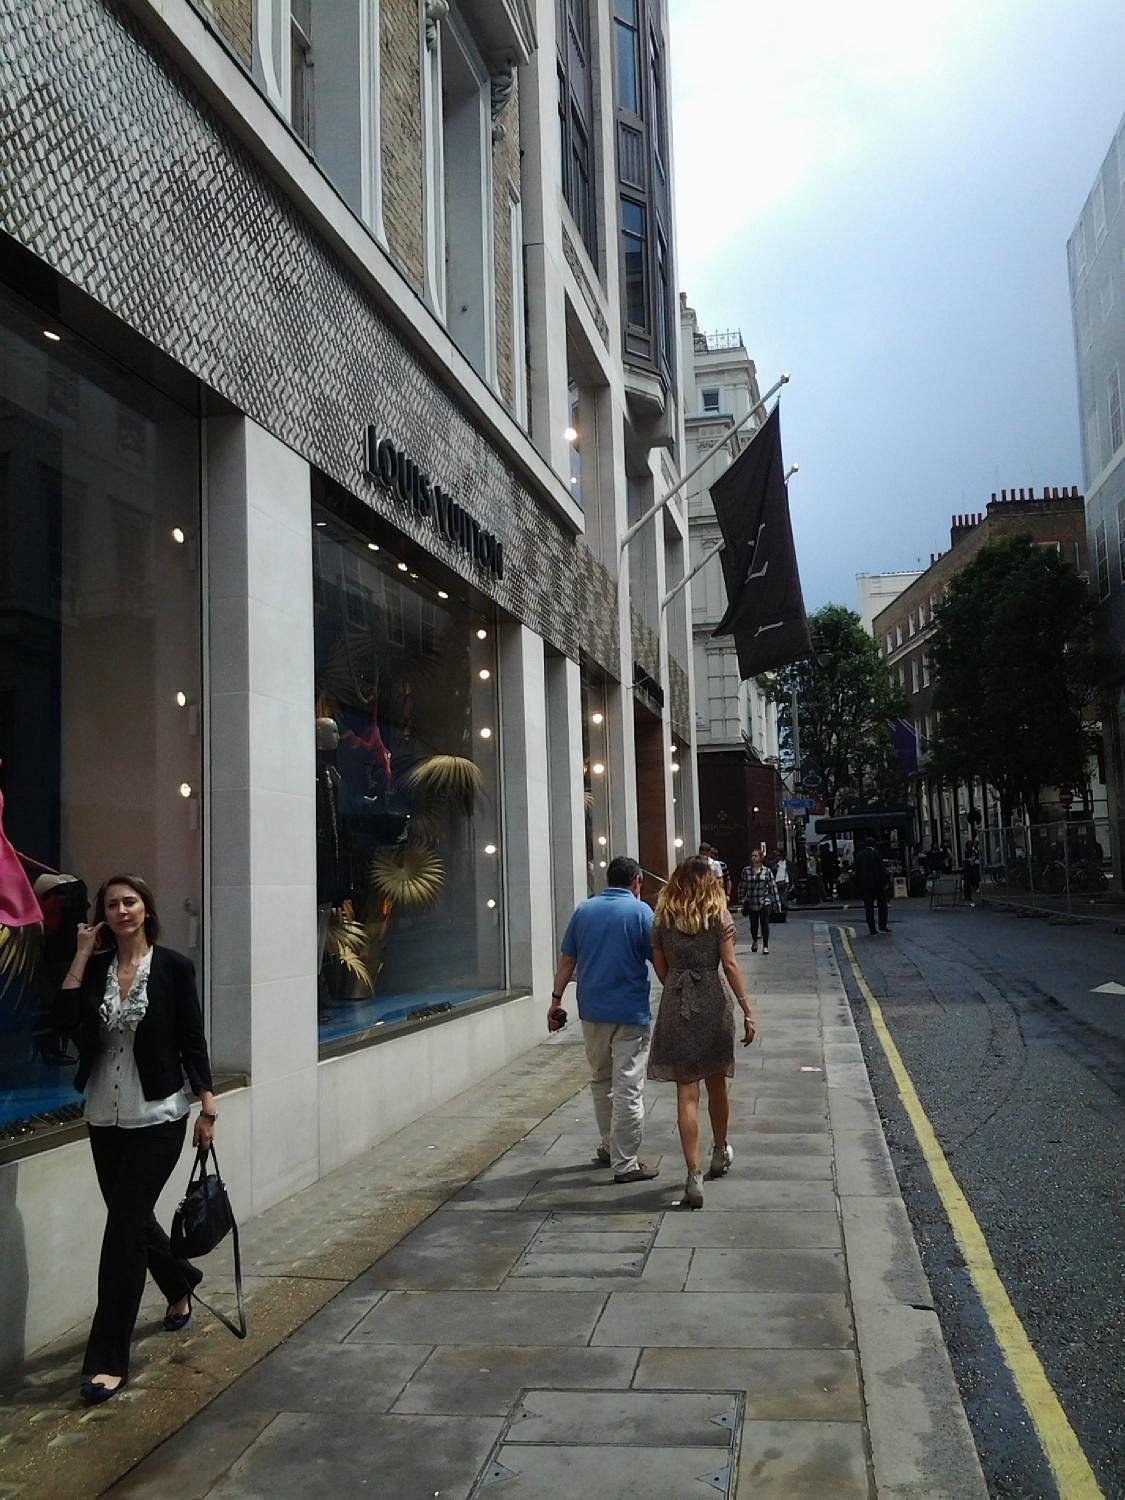 Louis Vuitton Shops In London: Explore The World Of Luxury